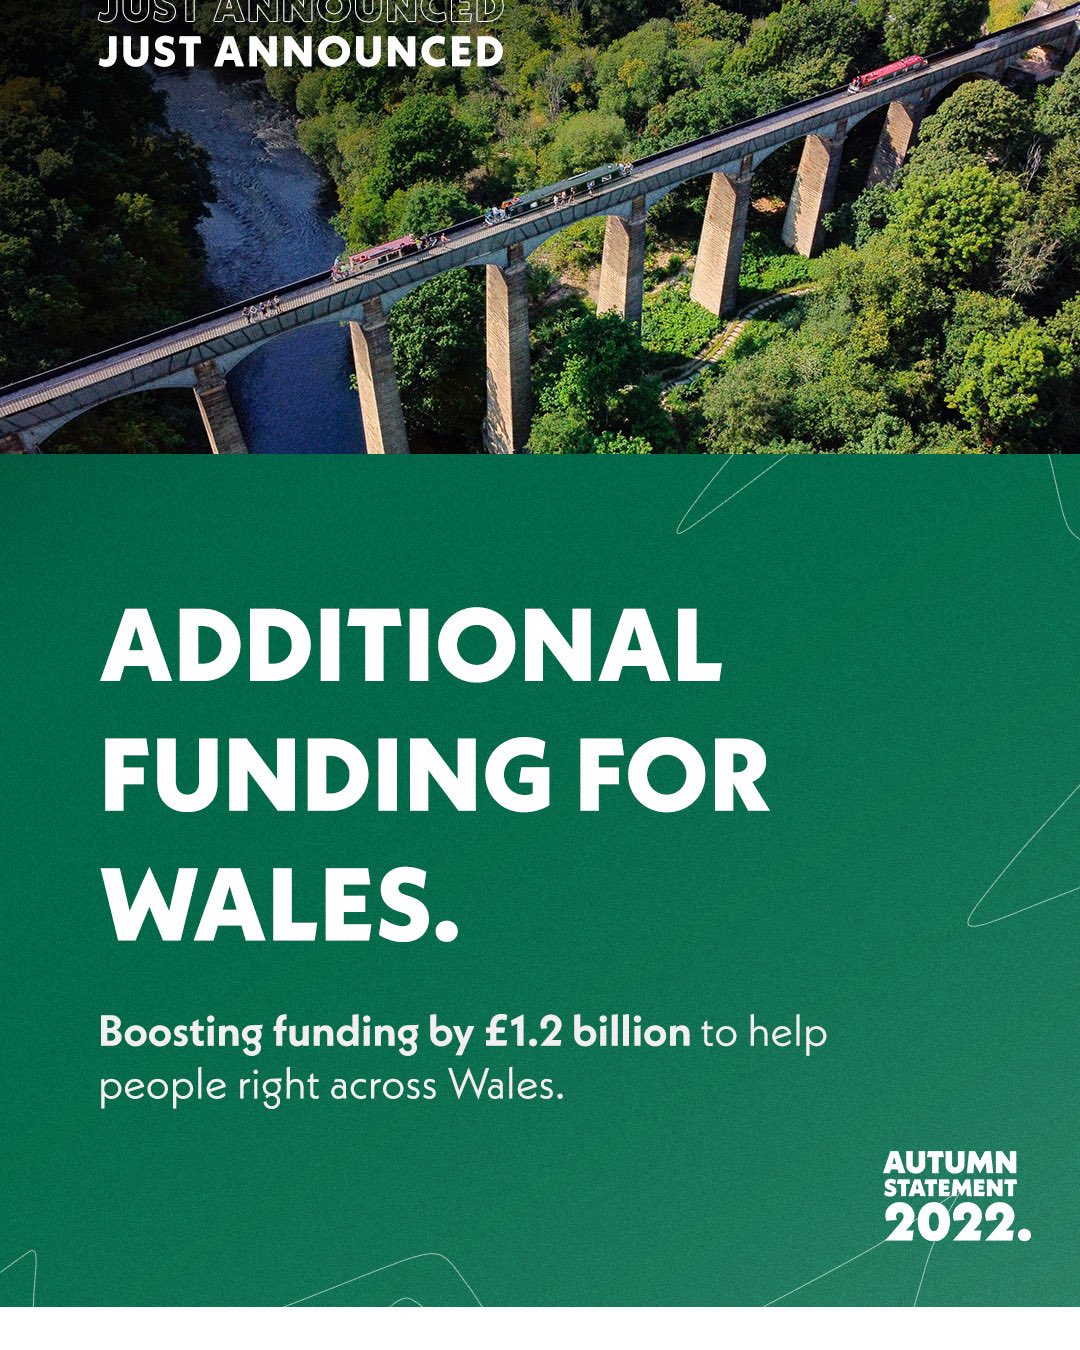 Additional funding for Wales